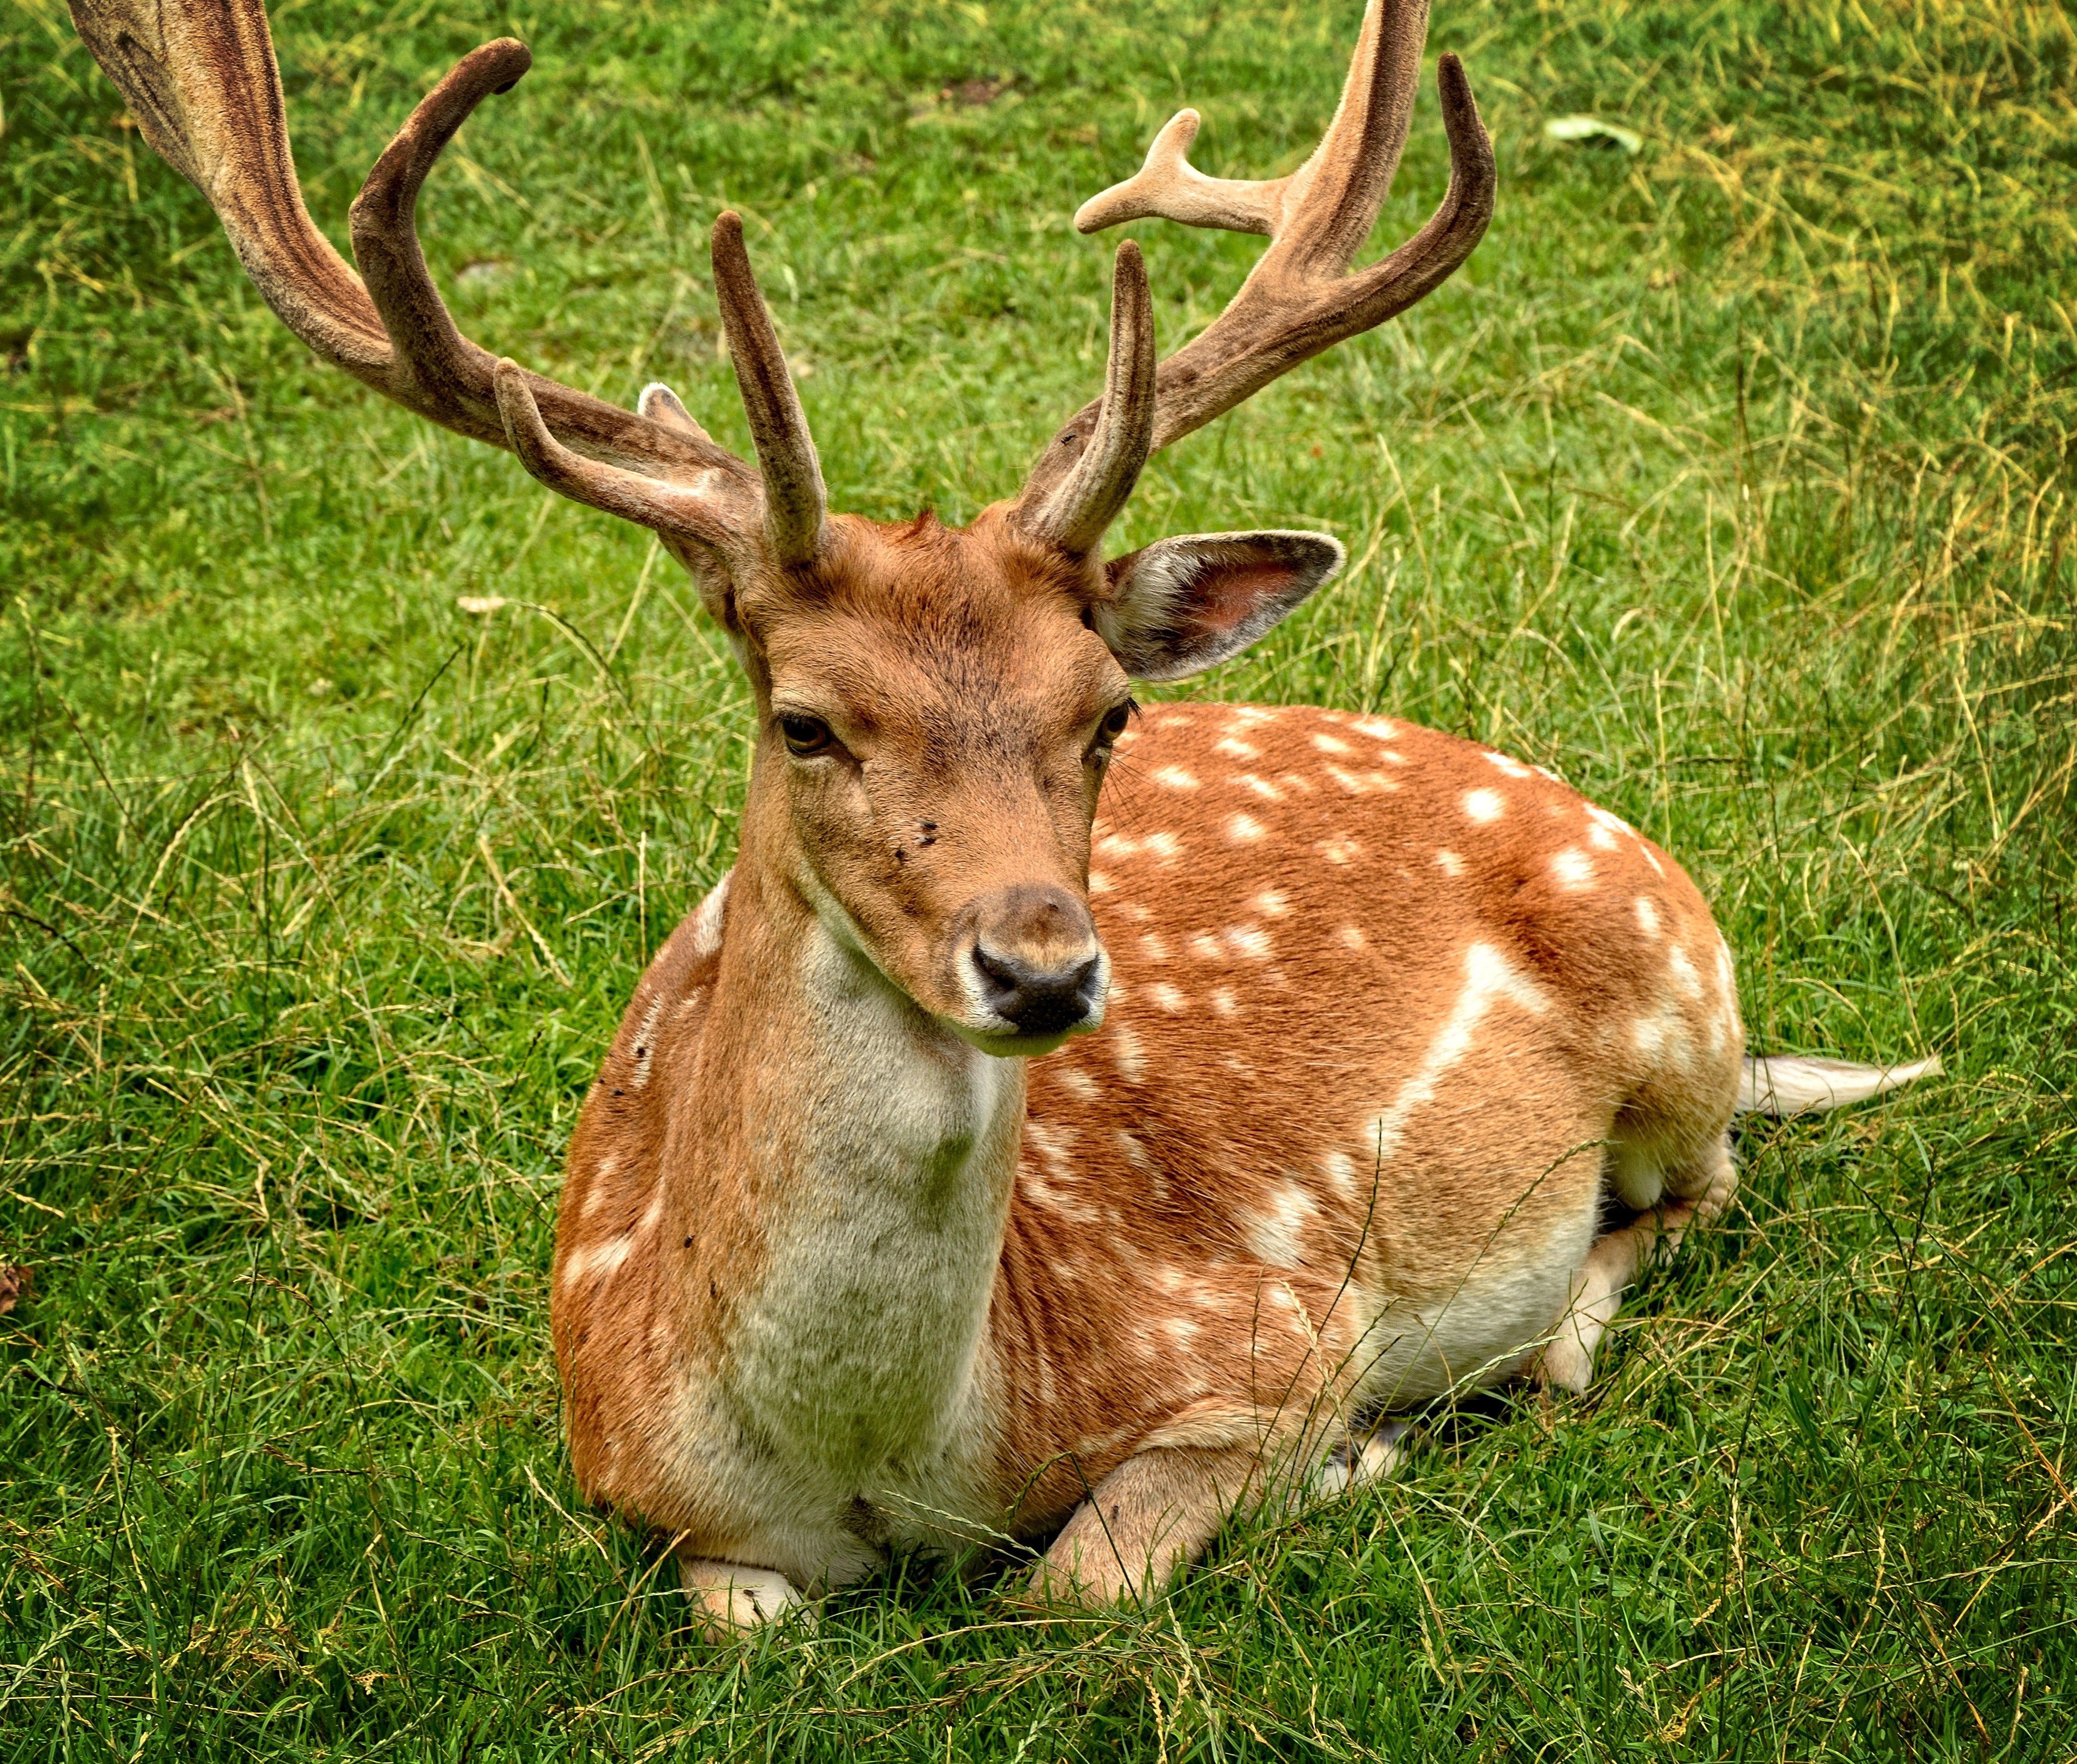 Deer Pictures [109 Results] · Pexels · Free Stock Photos